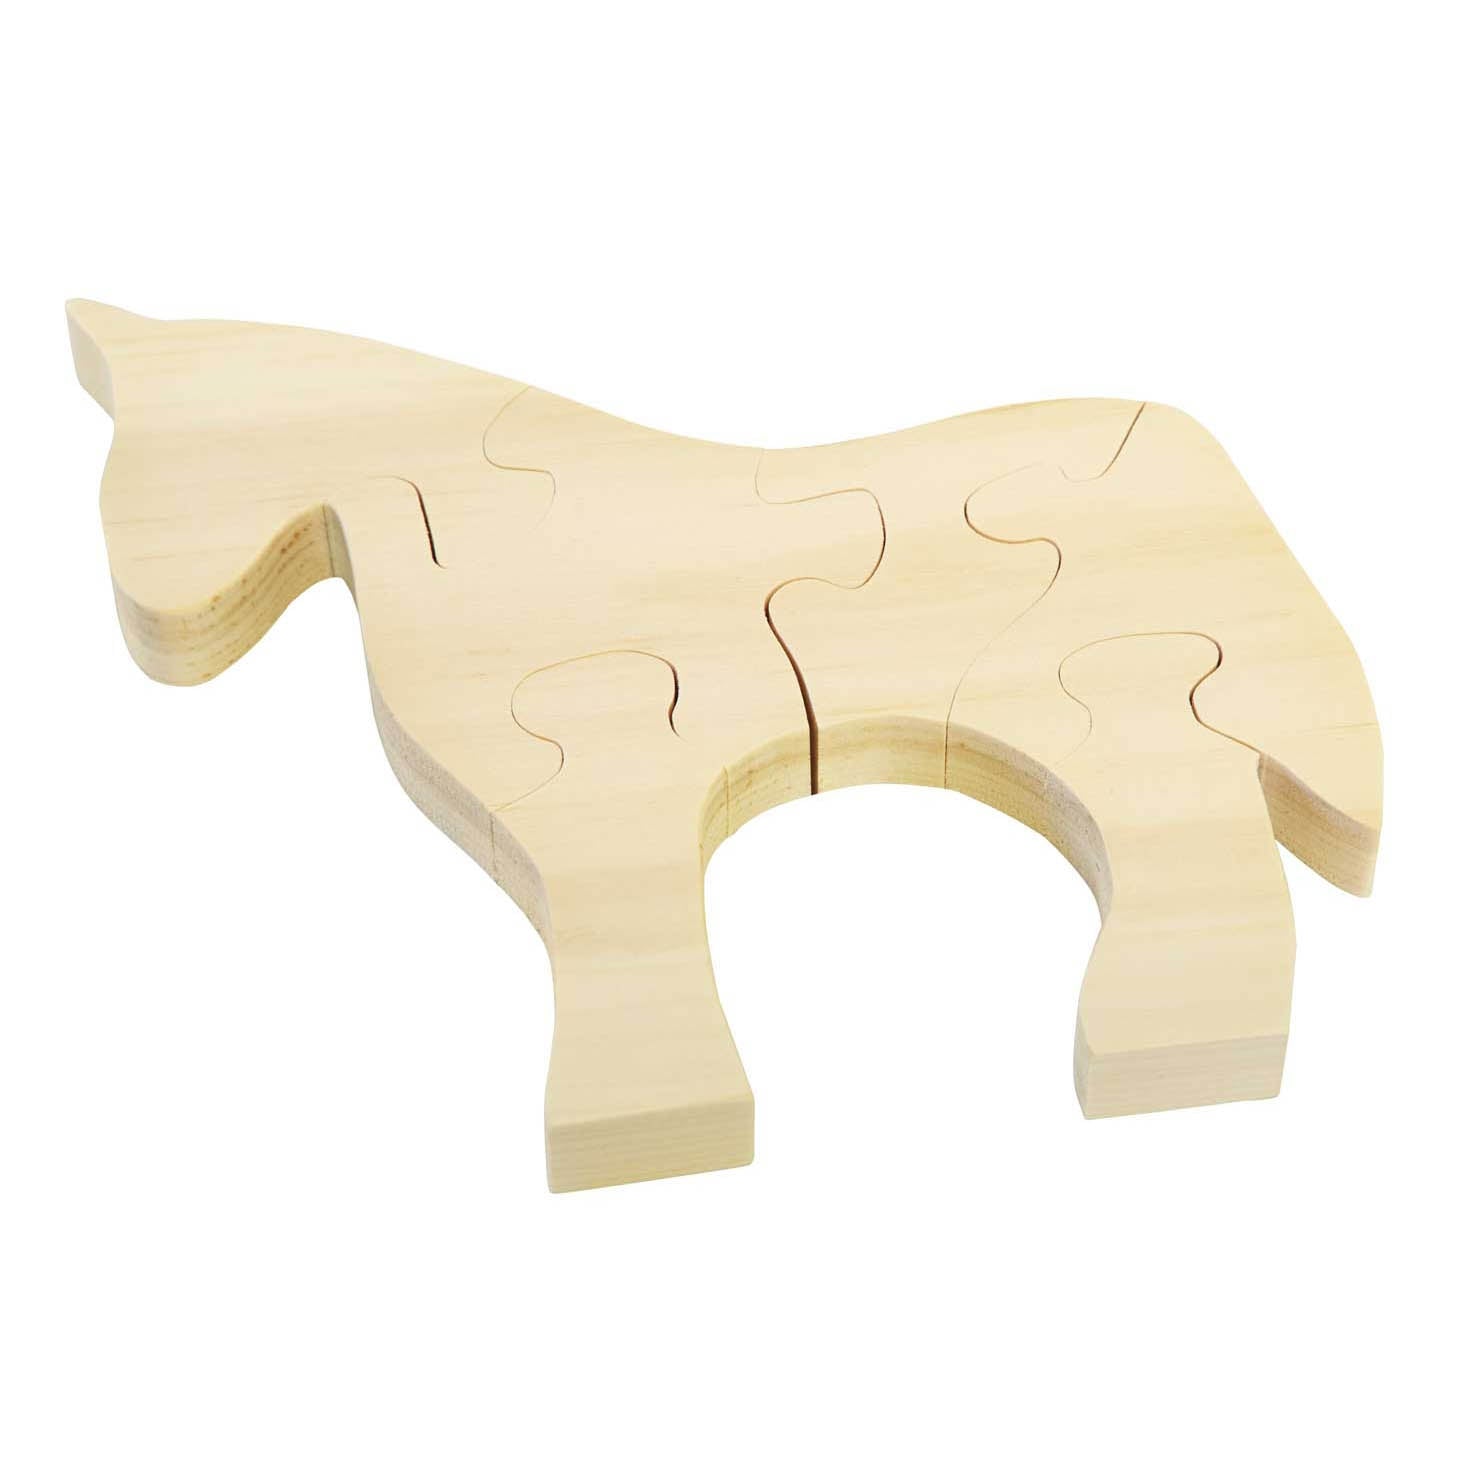 Wooden Jigsaws for Adults, Wood Puzzles